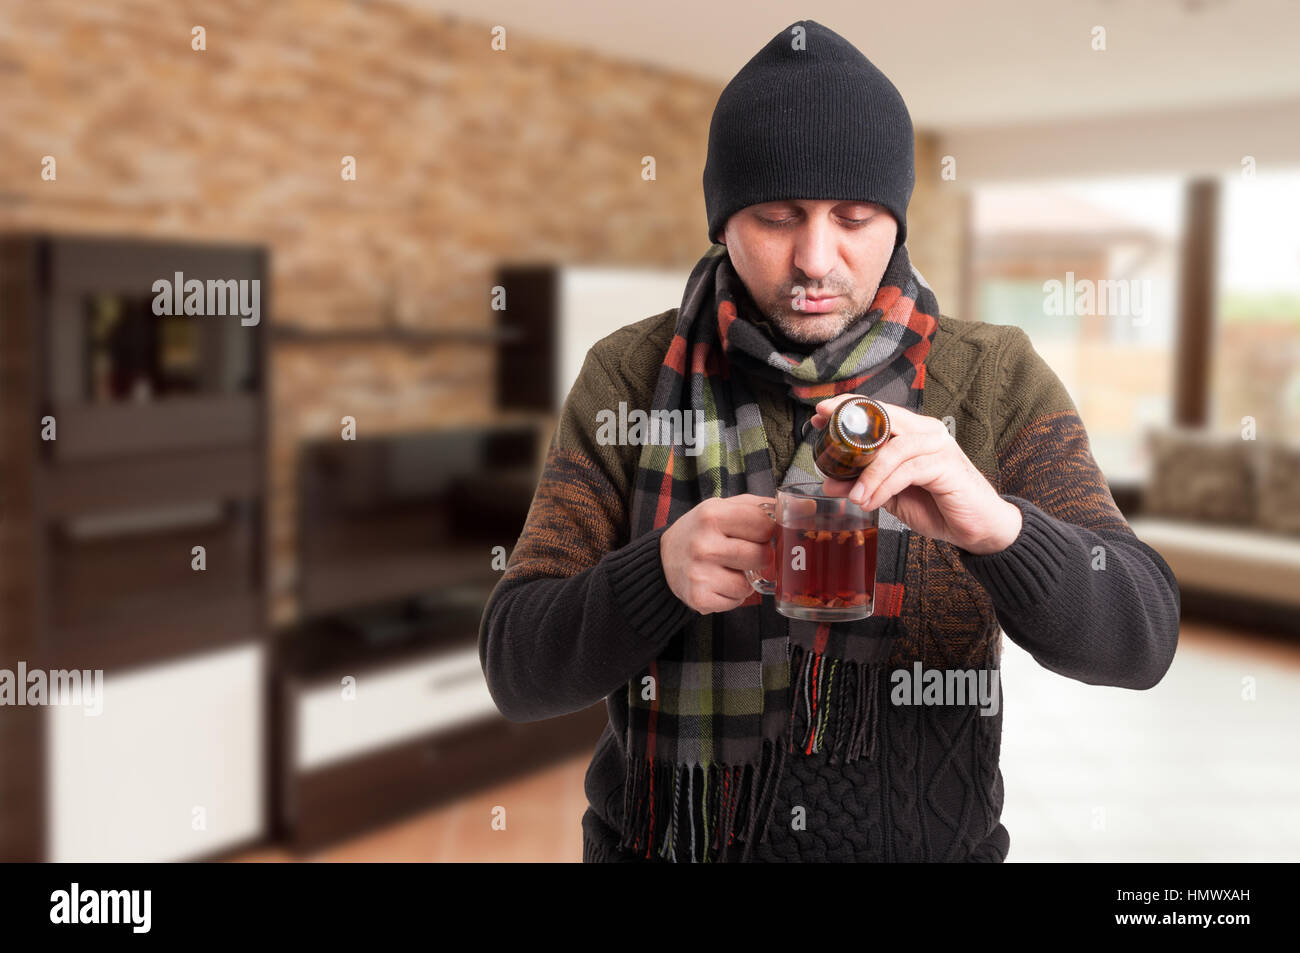 Sick man putting medicines in his tea inside the house as grippe treatment concept with copy text space Stock Photo